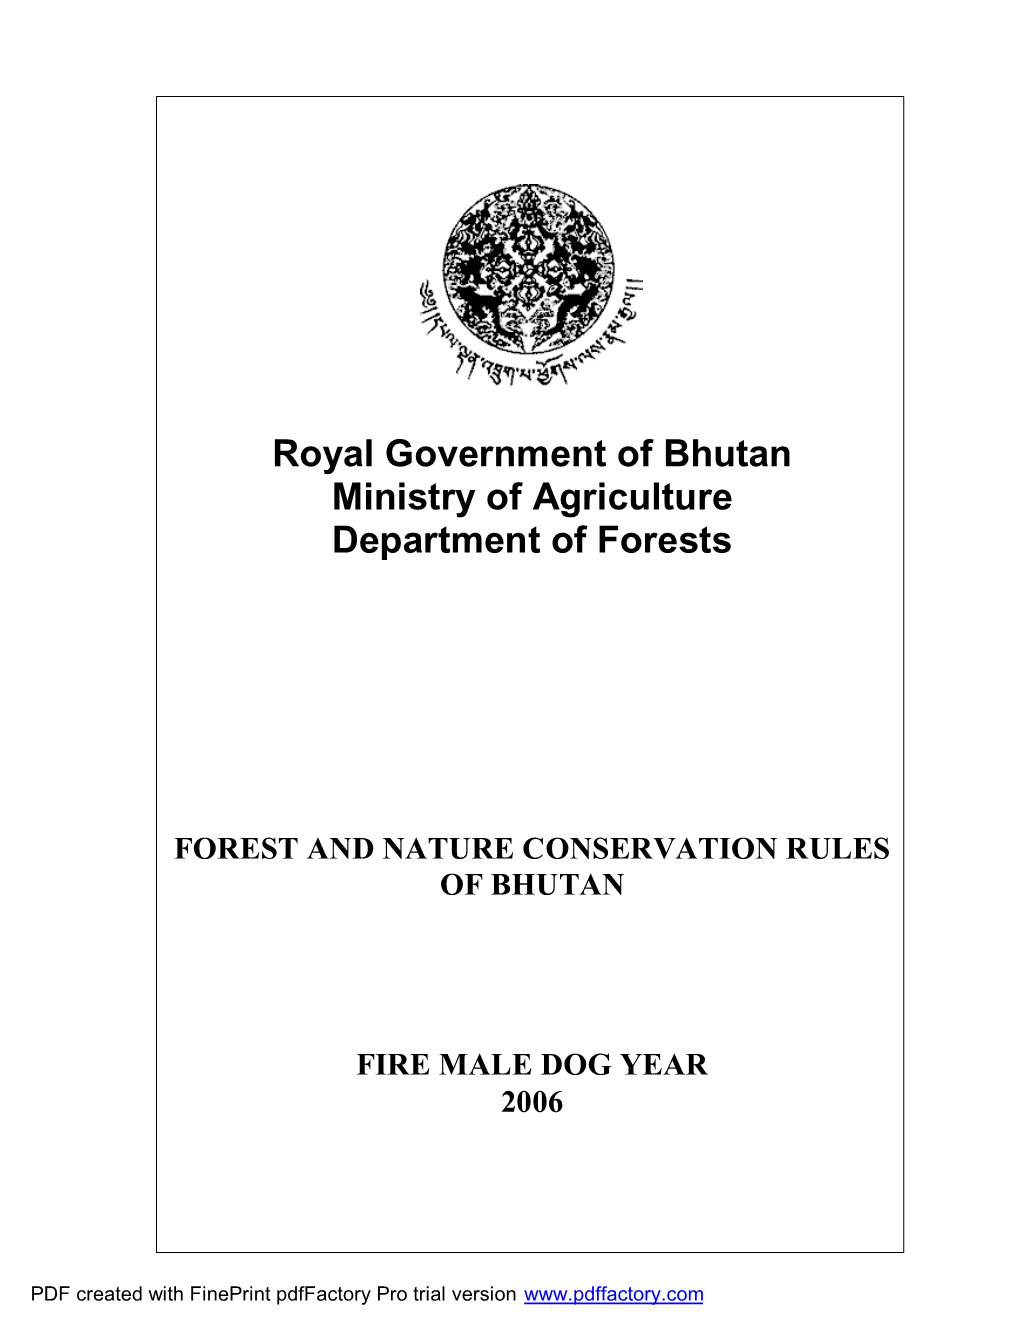 Forest and Nature Conservation Rules of Bhutan, 2006